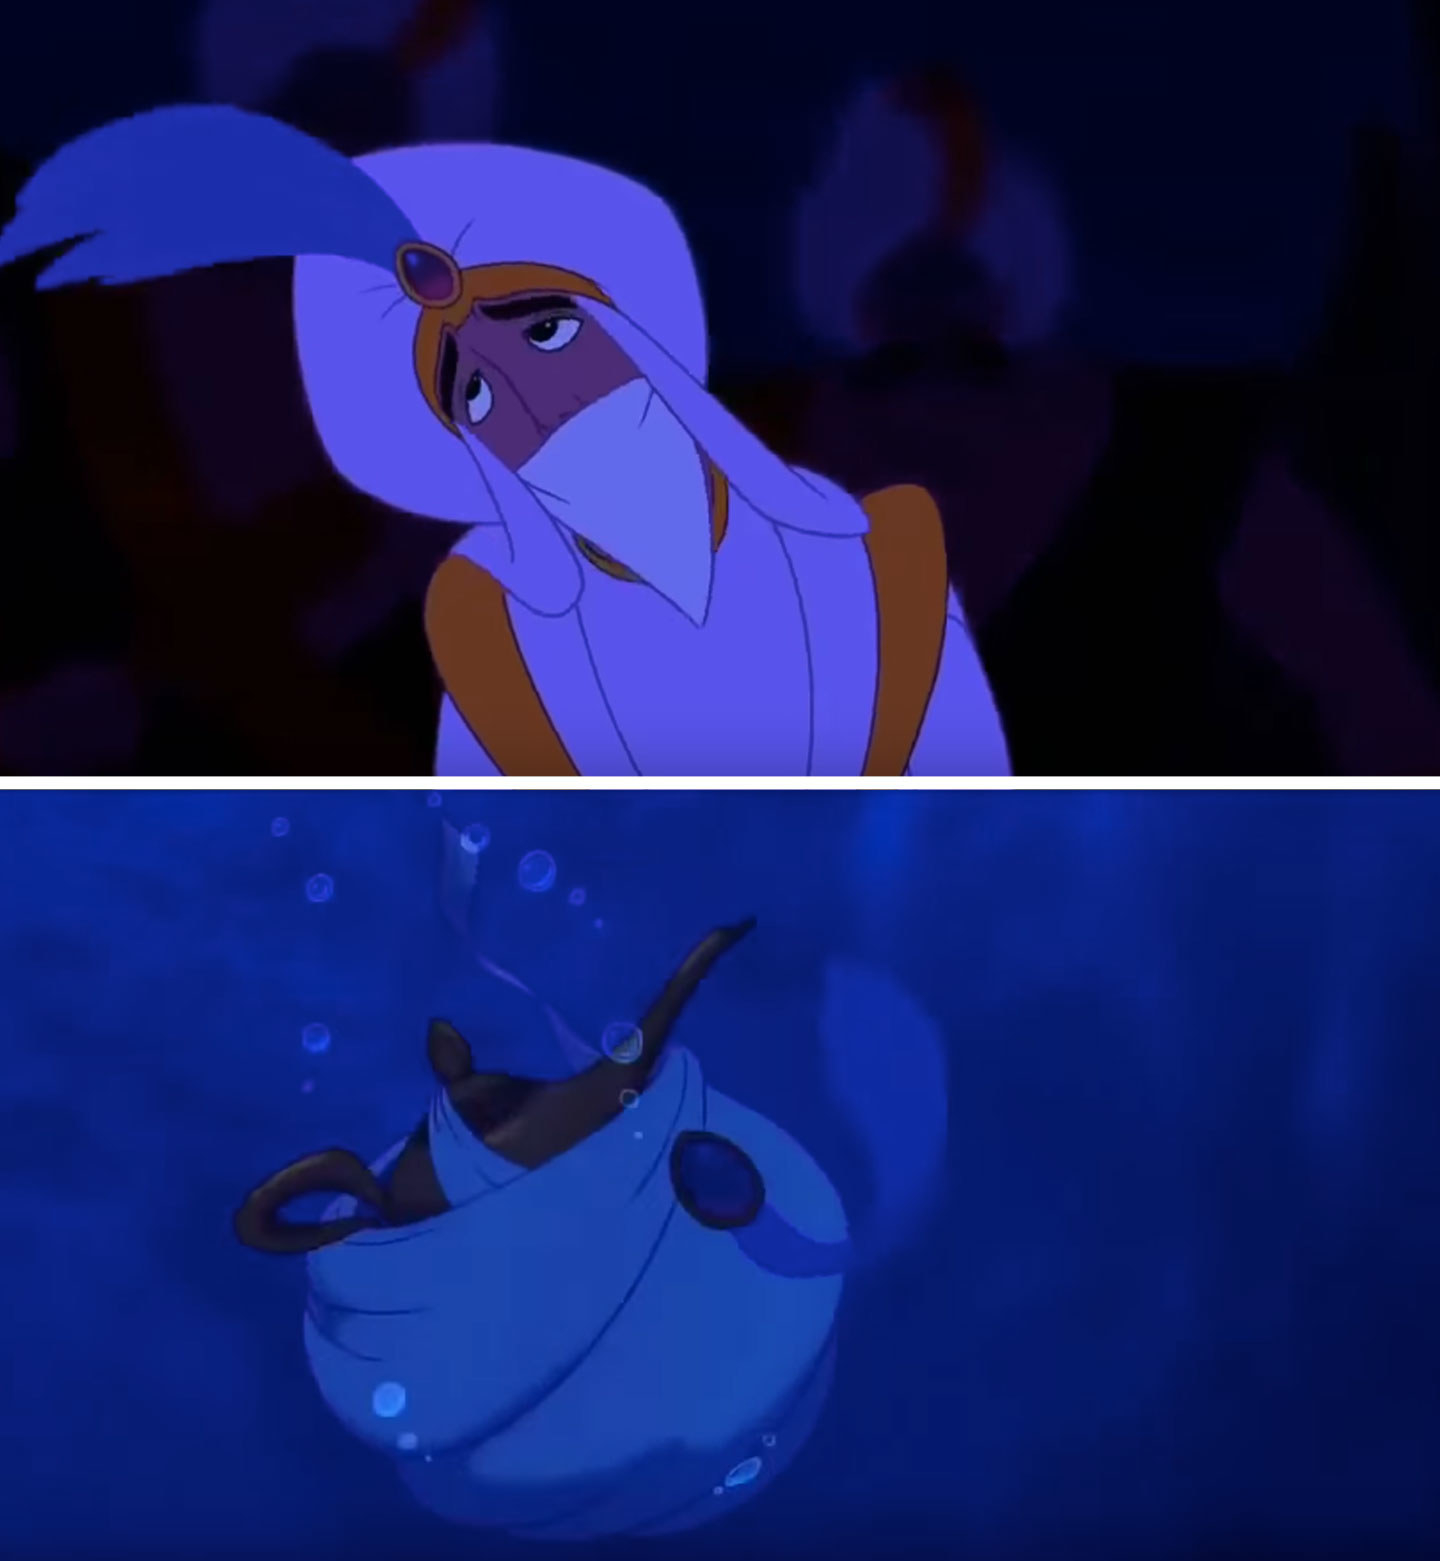 Aladdin is dropped in the water to drown, his hat has a gold band and a hat...